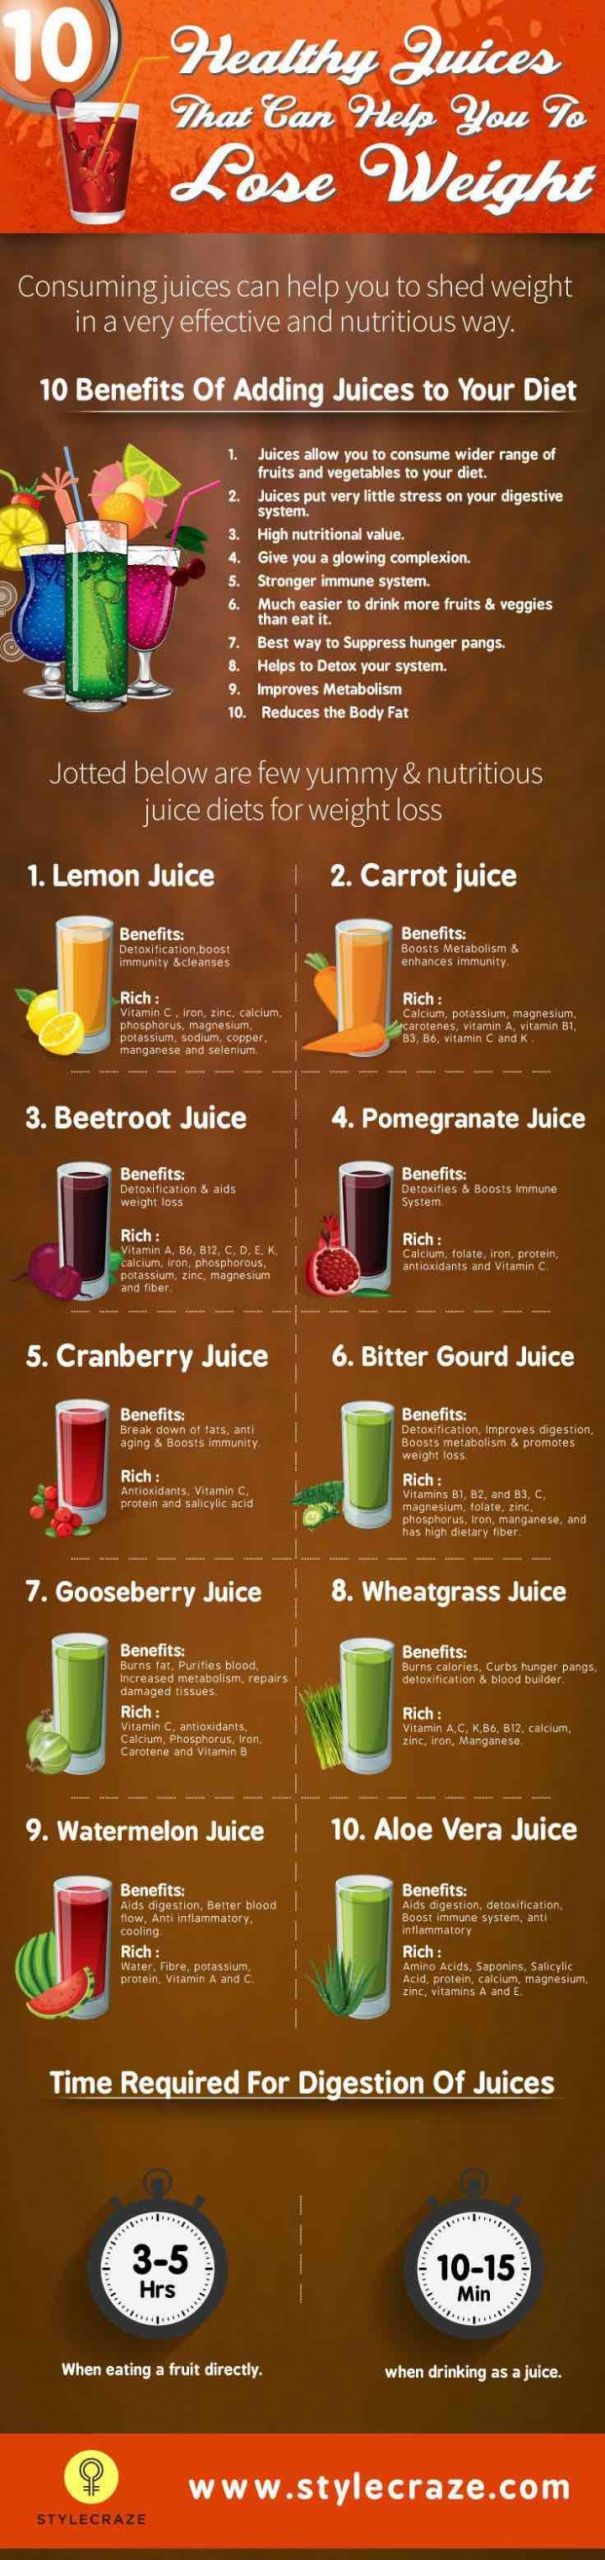 Juicing Recipes For Weight Loss
 Juicing Recipes for Detoxing and Weight Loss MODwedding